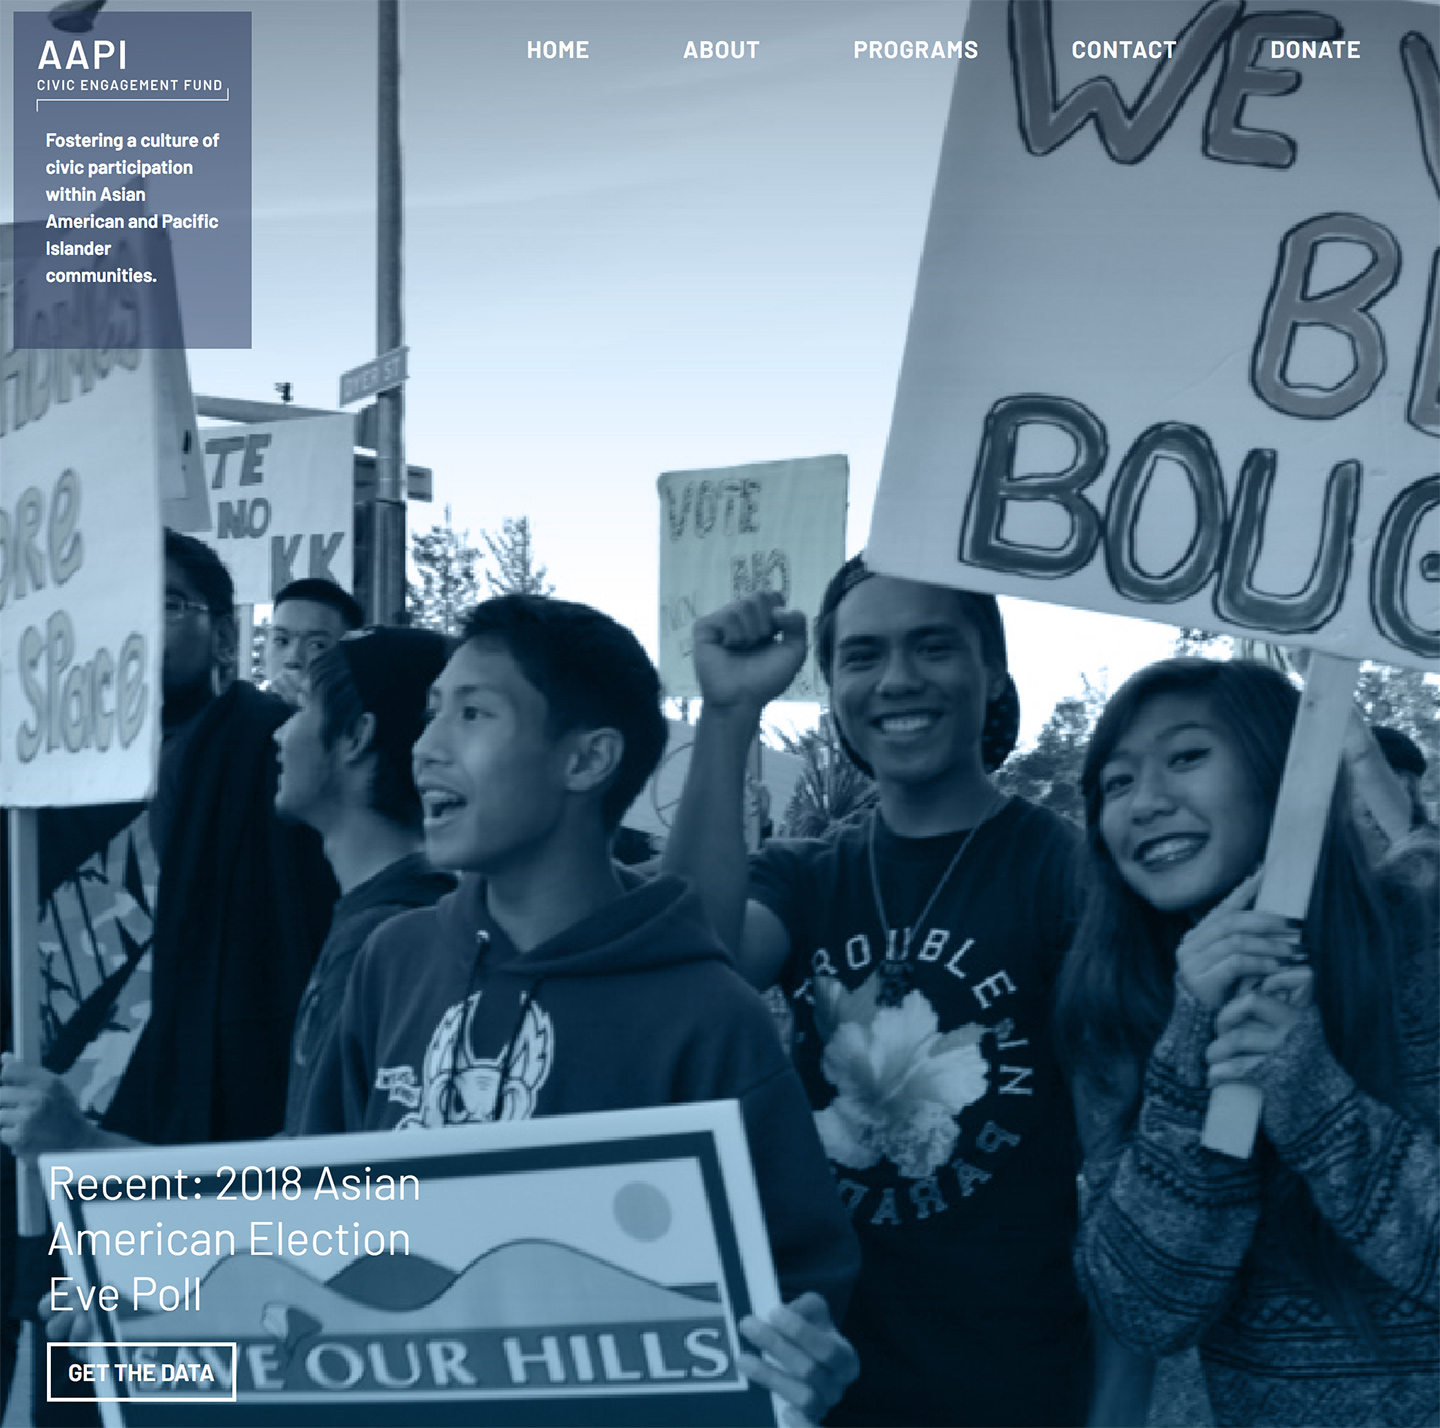 Site Overhaul for Asian American and Pacific Islander Civic Engagement Fund (AAPI)!